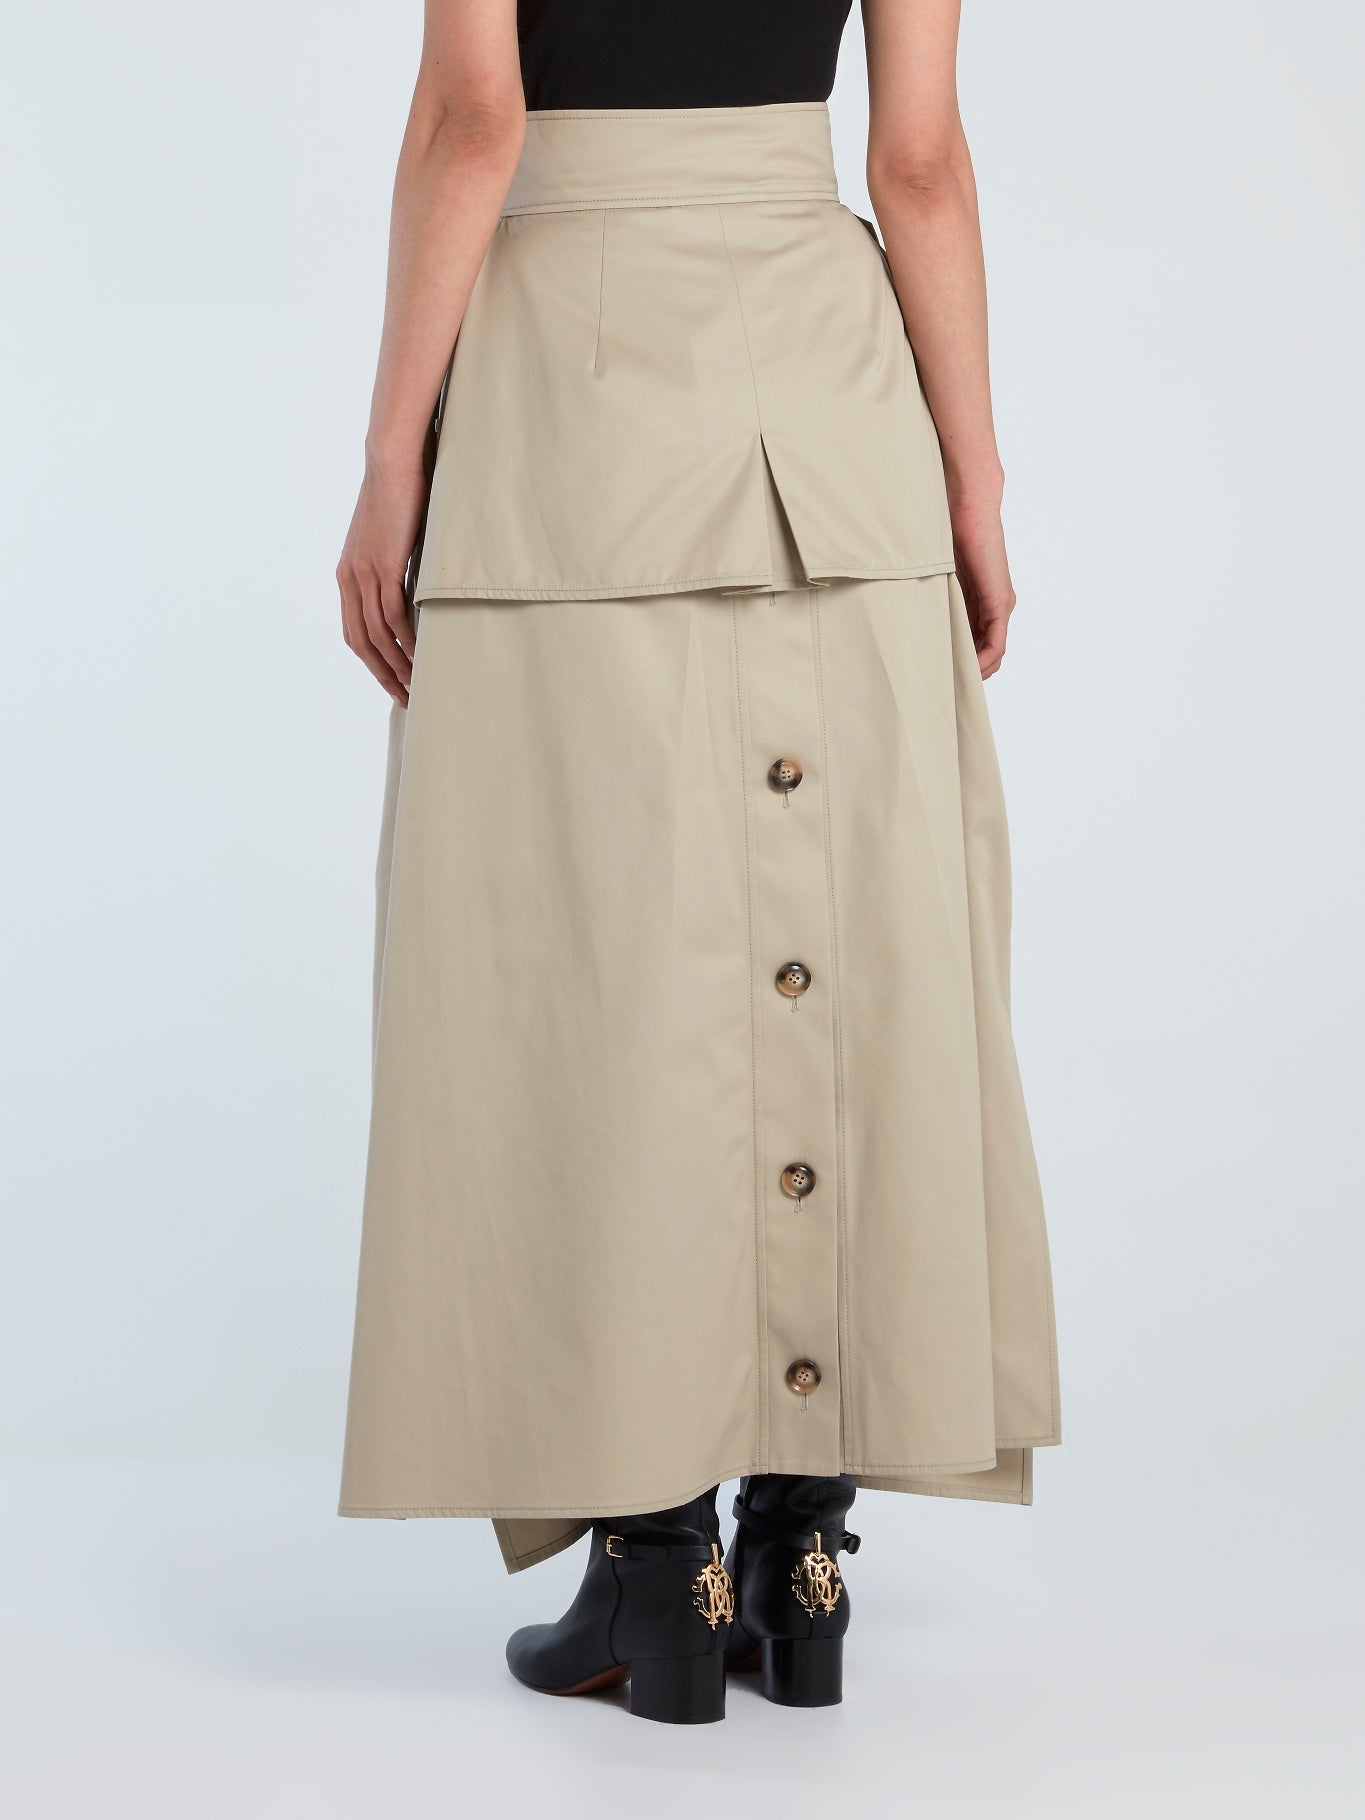 Reconstructed Trench – Maxi Global Form Maison-B-More Skirt Store